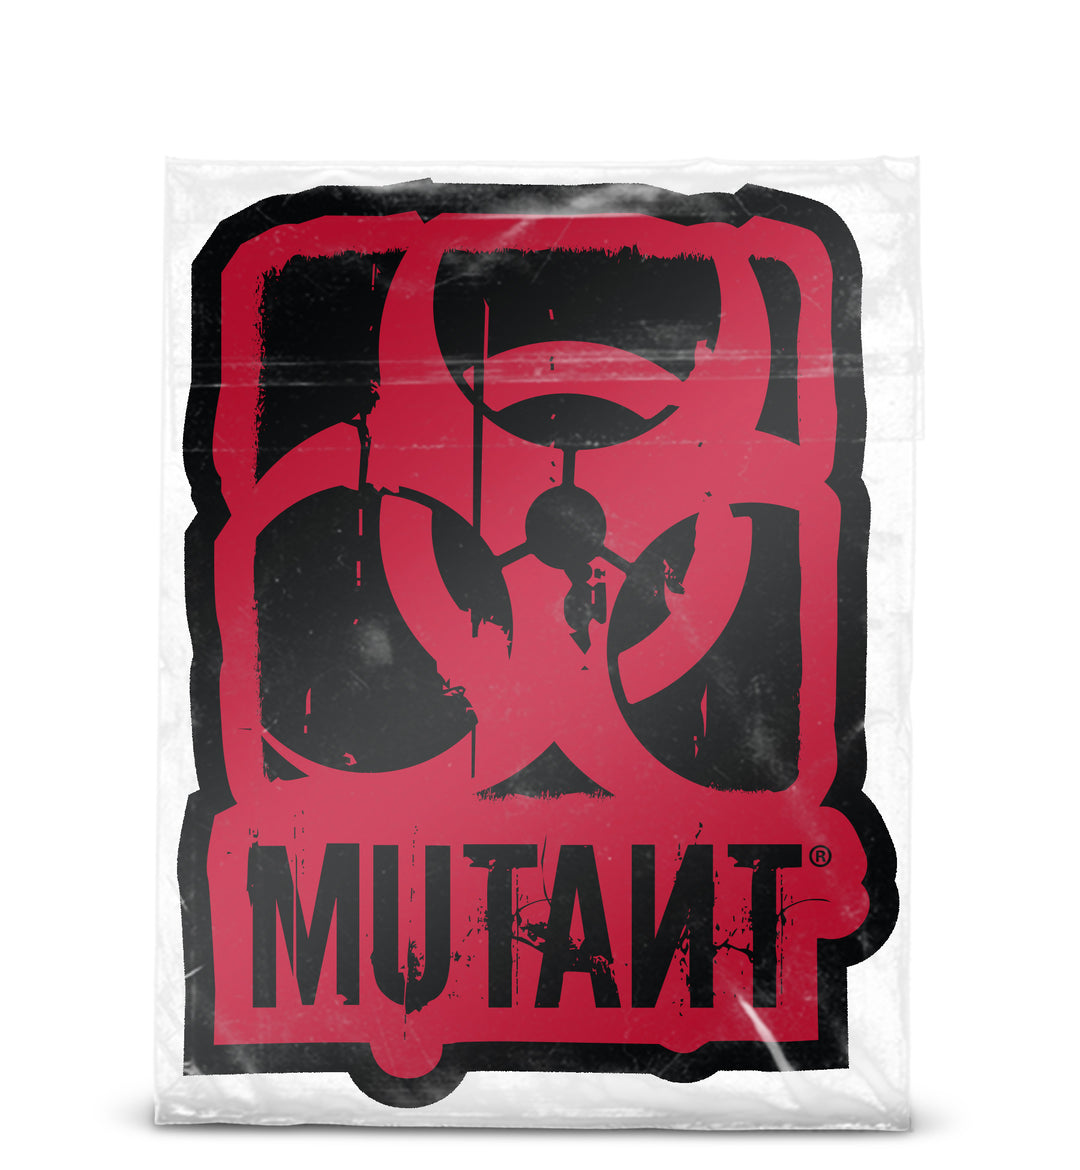 A photo of the Rugged Truck Window Decal featuring the MUTANT logo in red against a shaped black background, presented on a transparent plastic back with a white background.